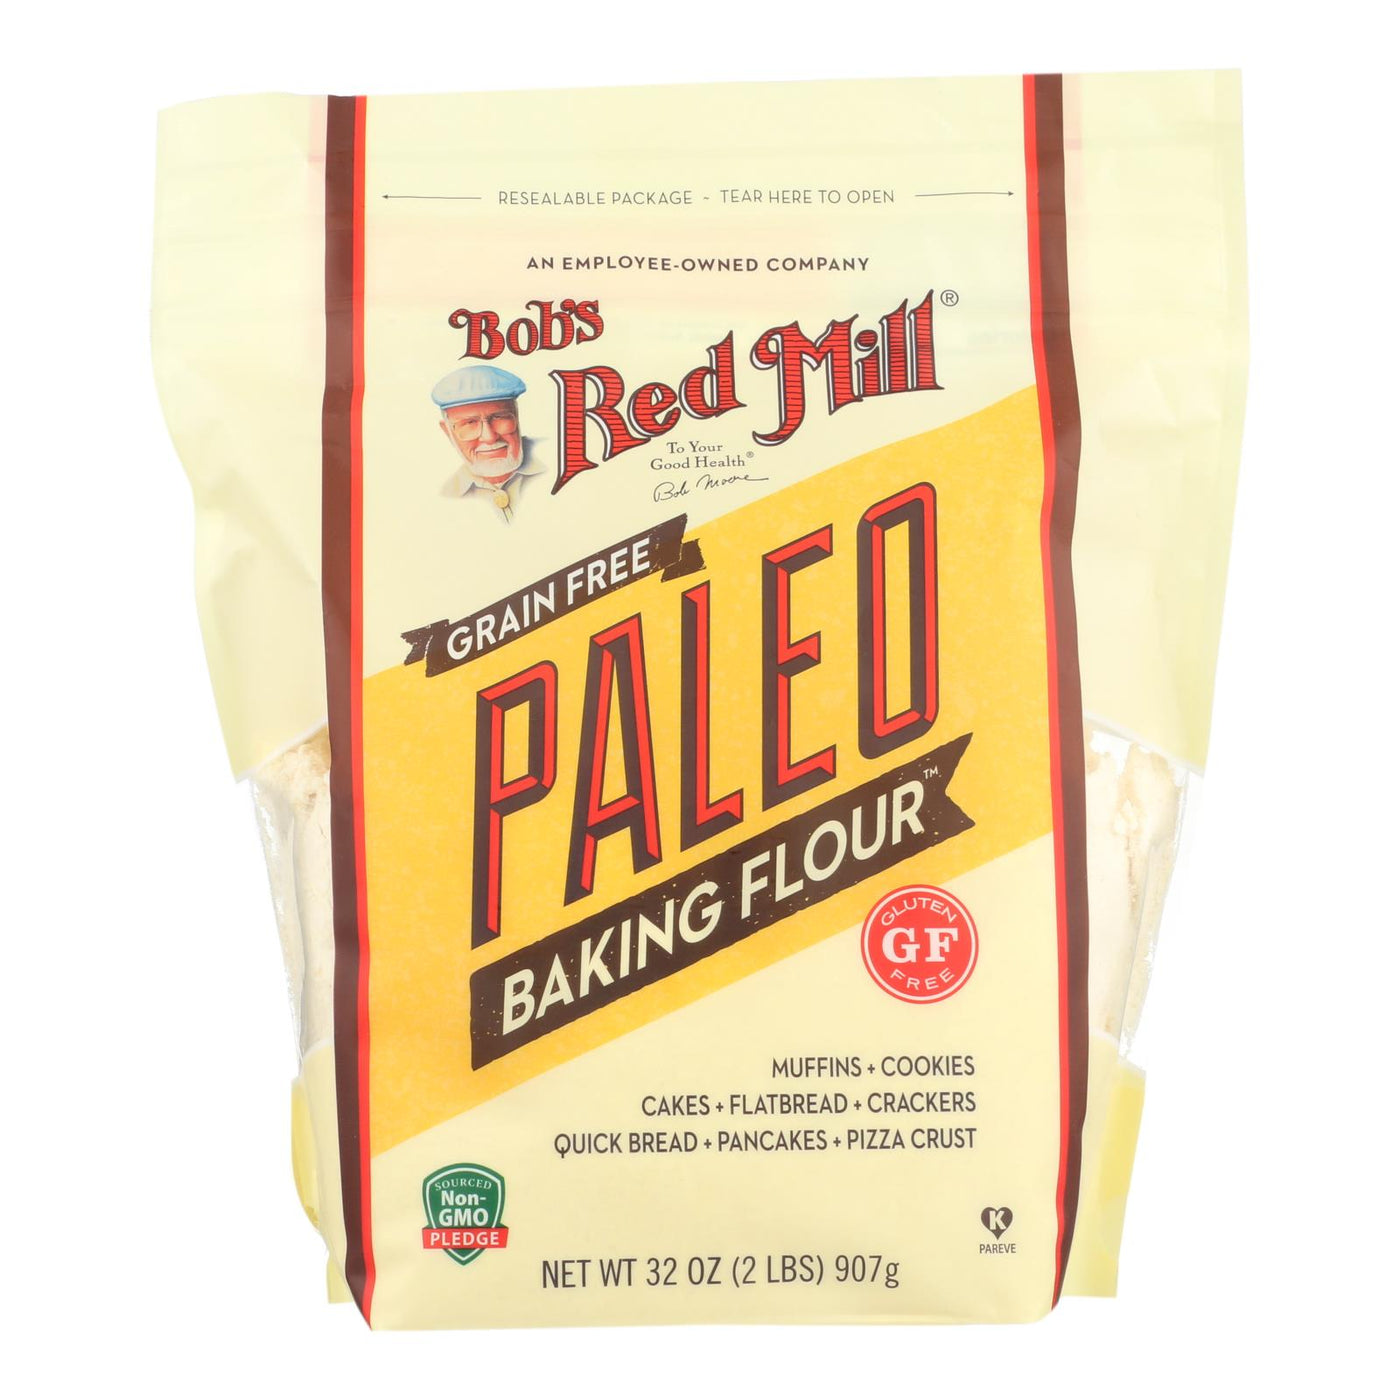 Bob's Red Mill - Baking Flour Paleo - Case Of 4-32 Oz - OnlyNaturals